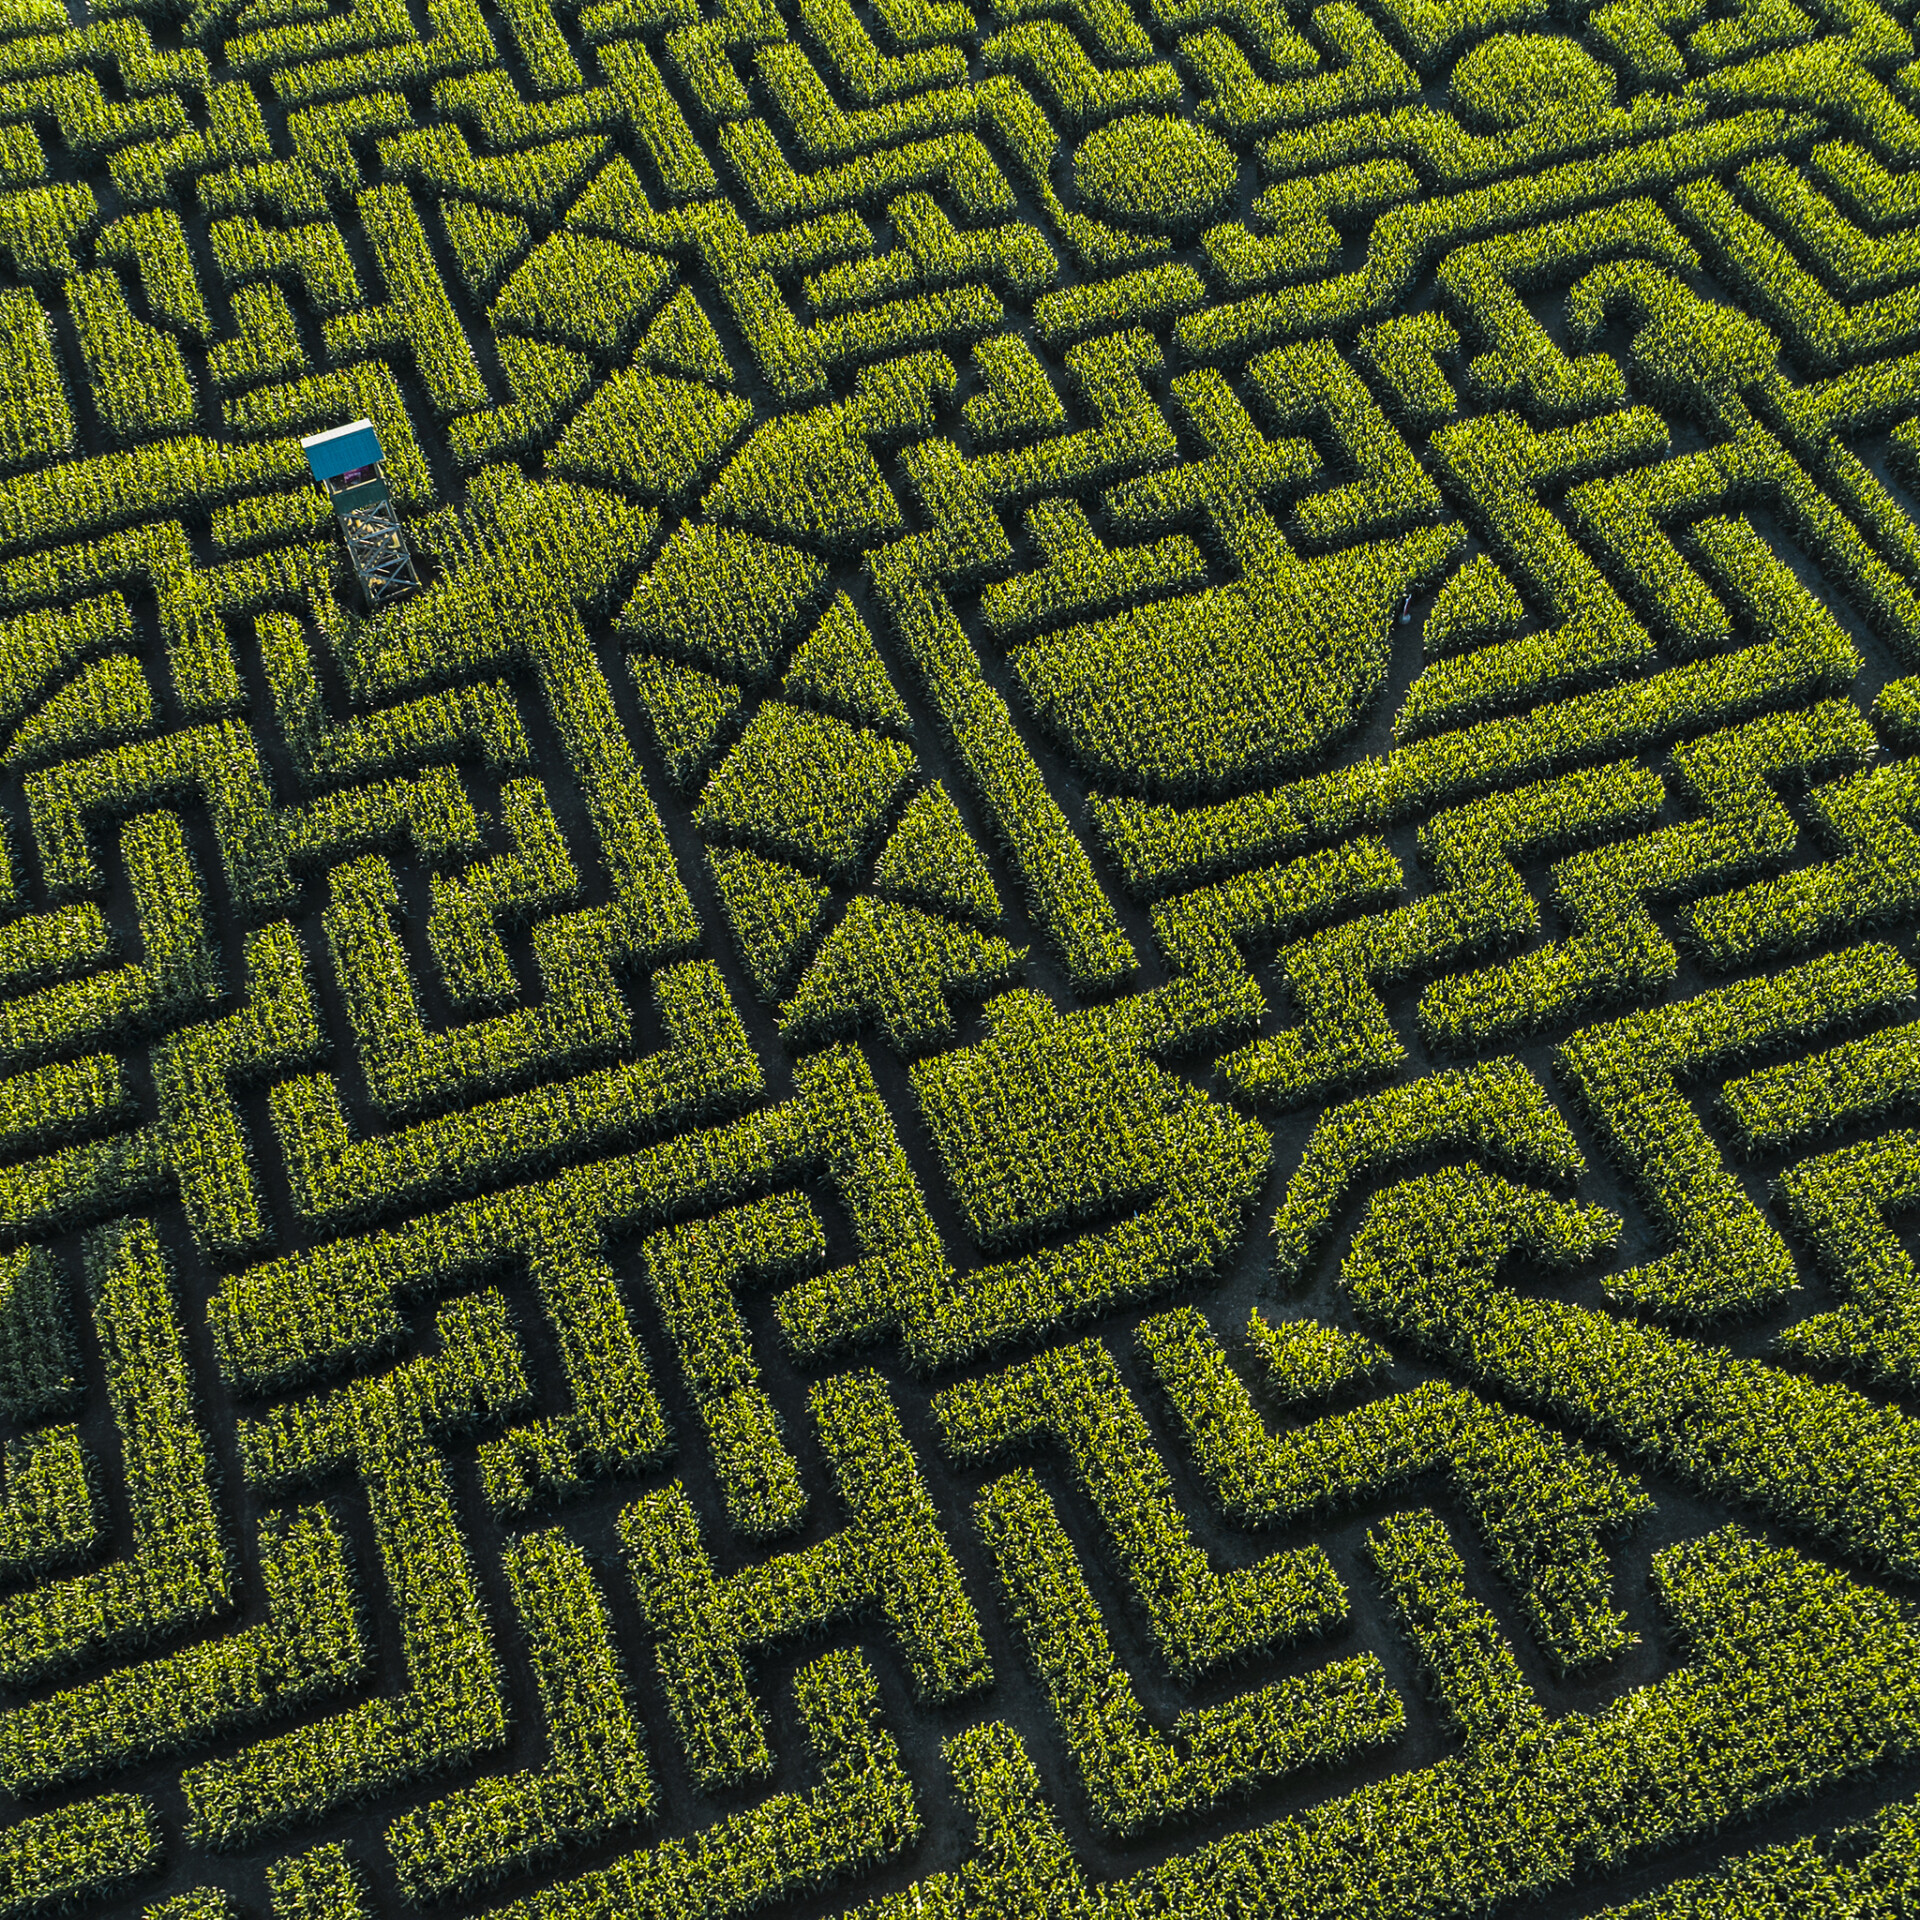 Maze of hedges with tower in the middle